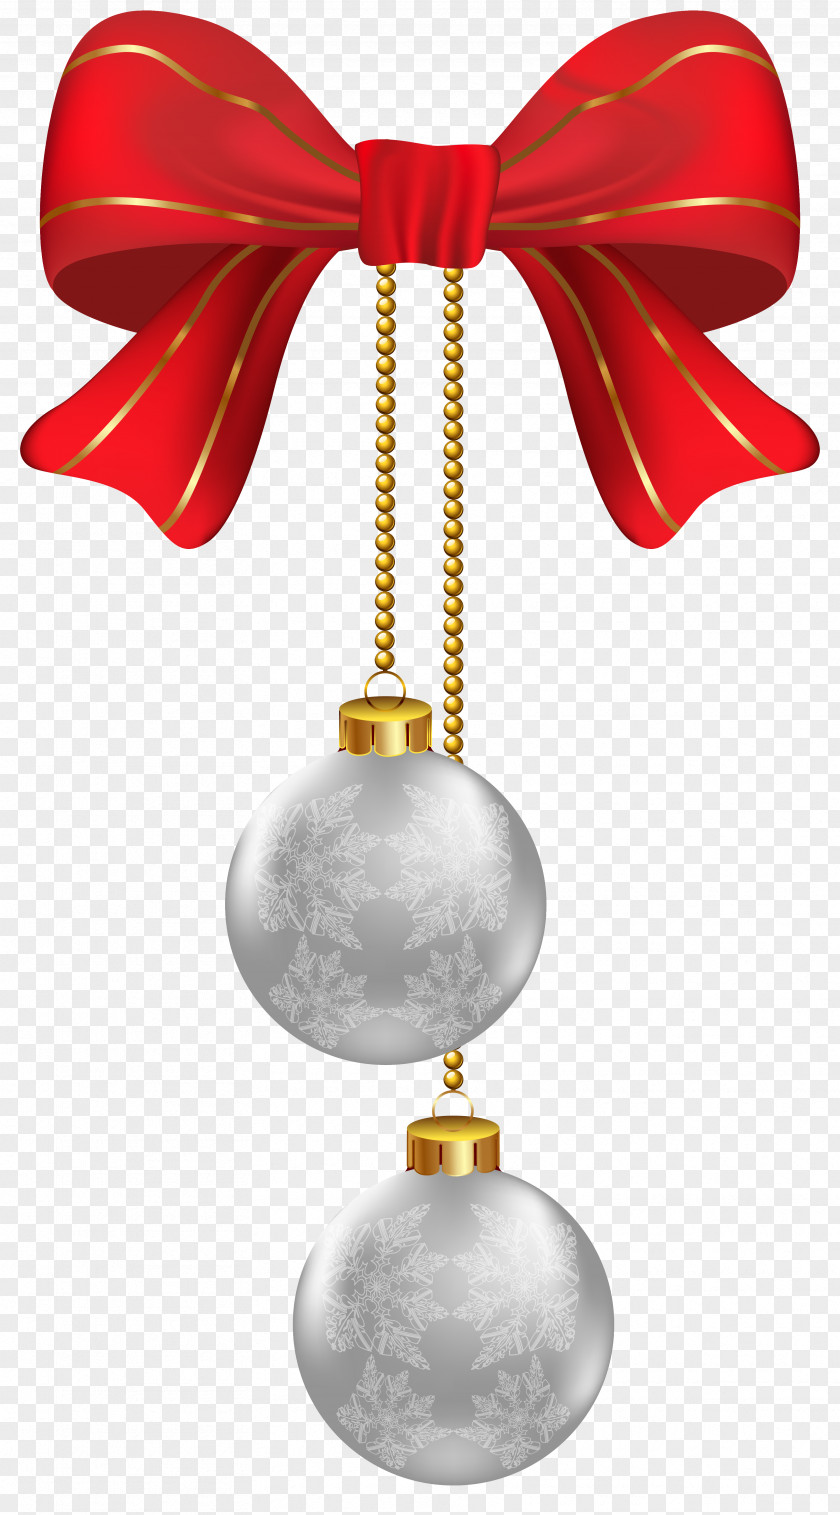 Hanging Christmas Silver Ornaments Clipart Image PNG